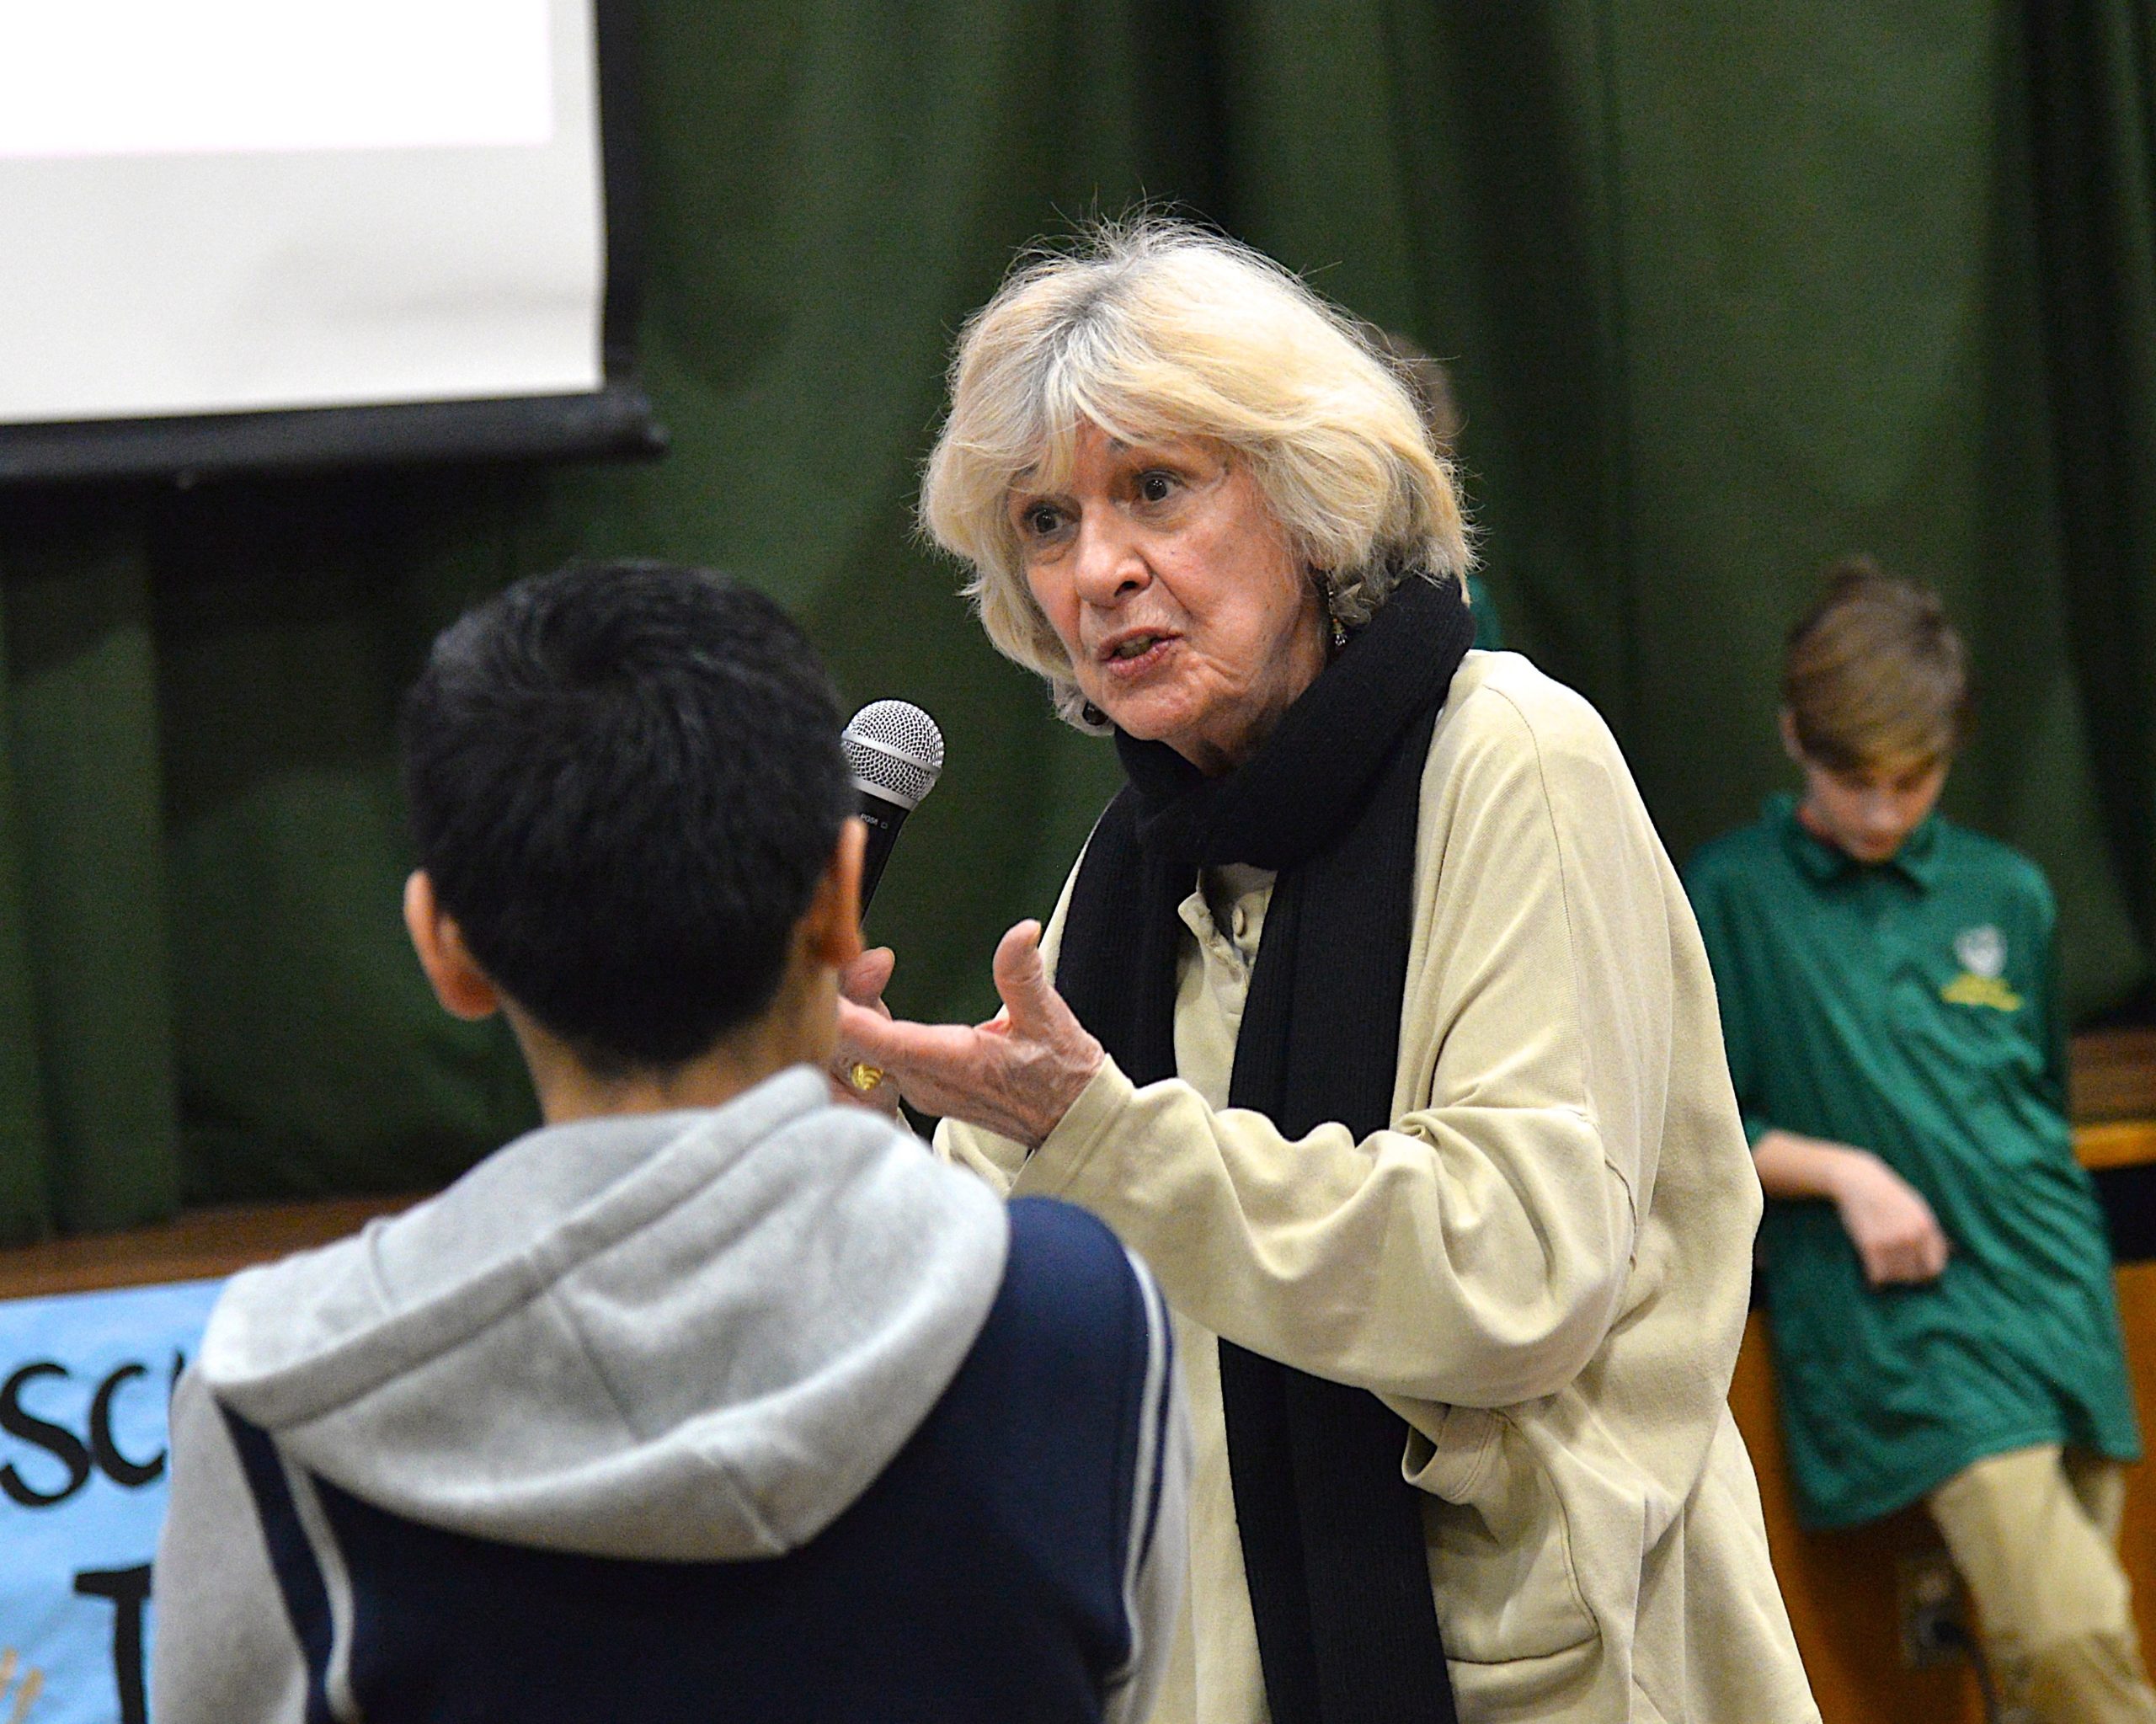 Phyllis Italiano introduces herself at the Springs School's Diversity Institute program on Friday. KYRIL BROMLEY